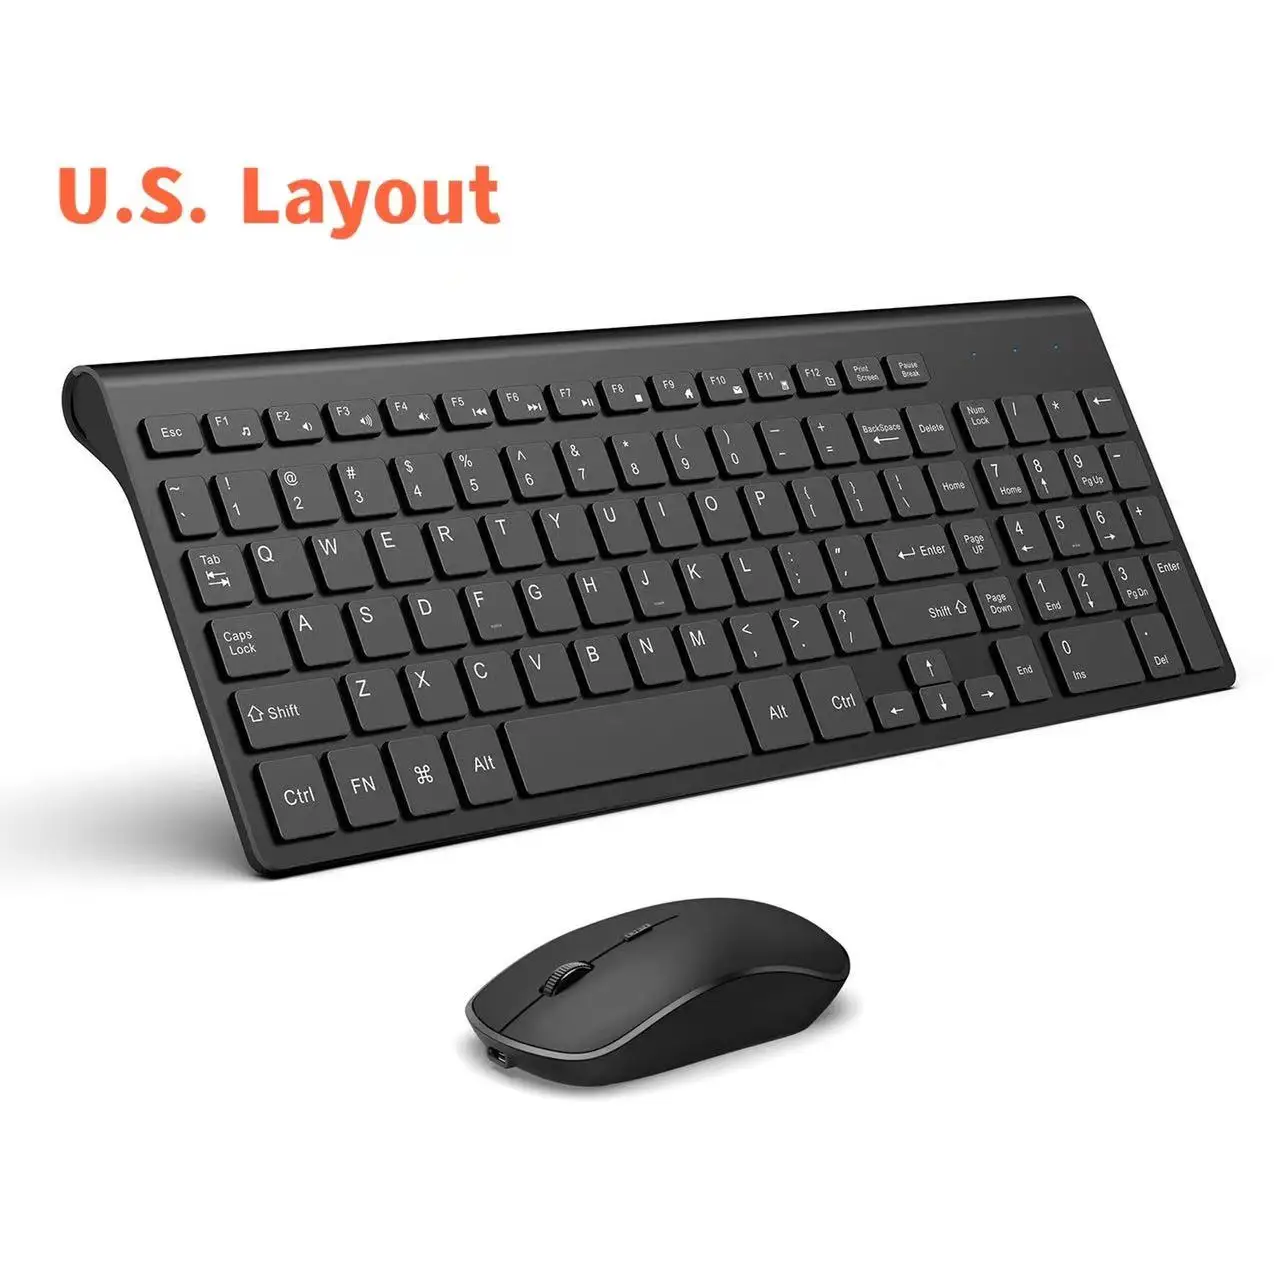 

Rechargeable Keyboard and Mouse,2.4G Full Size Wireless Keyboard US/Spain Layout 2400 DPI Quiet Click Mice for PC Laptop Mac